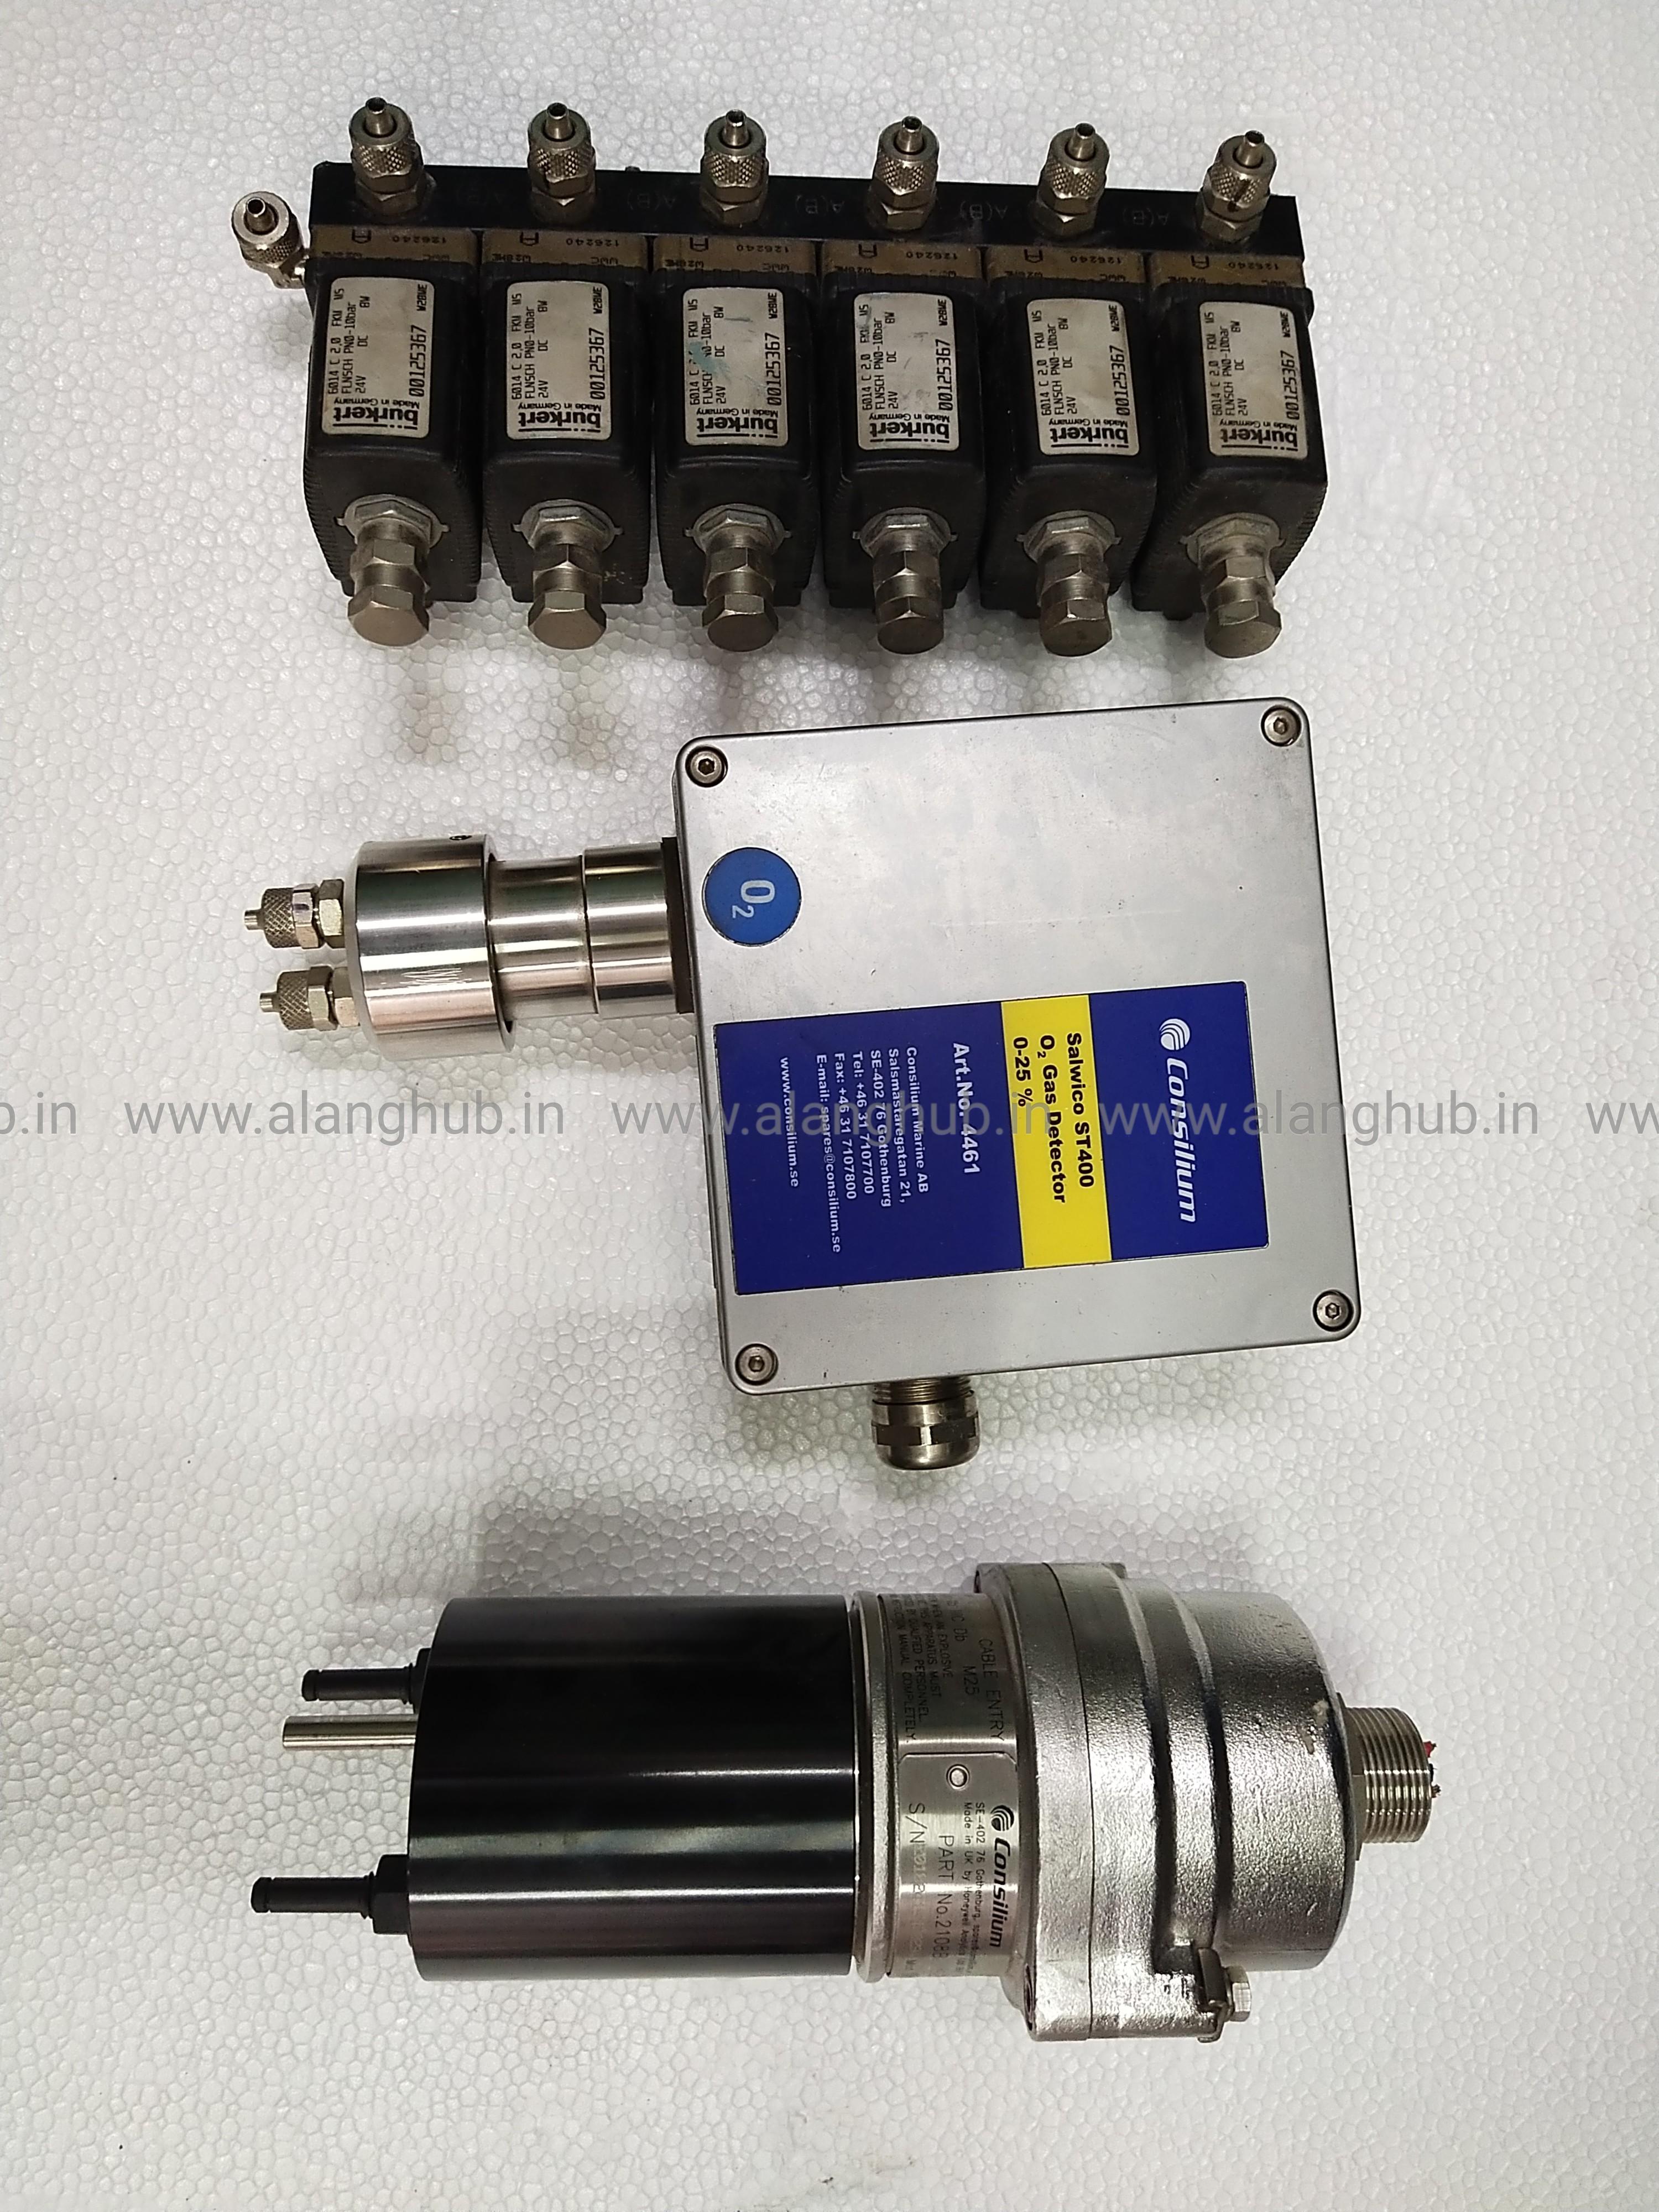 Consilium Salwico ST400, O2 Gas Detector, Infrared gas detector, Used, Second hand, Aftermarket